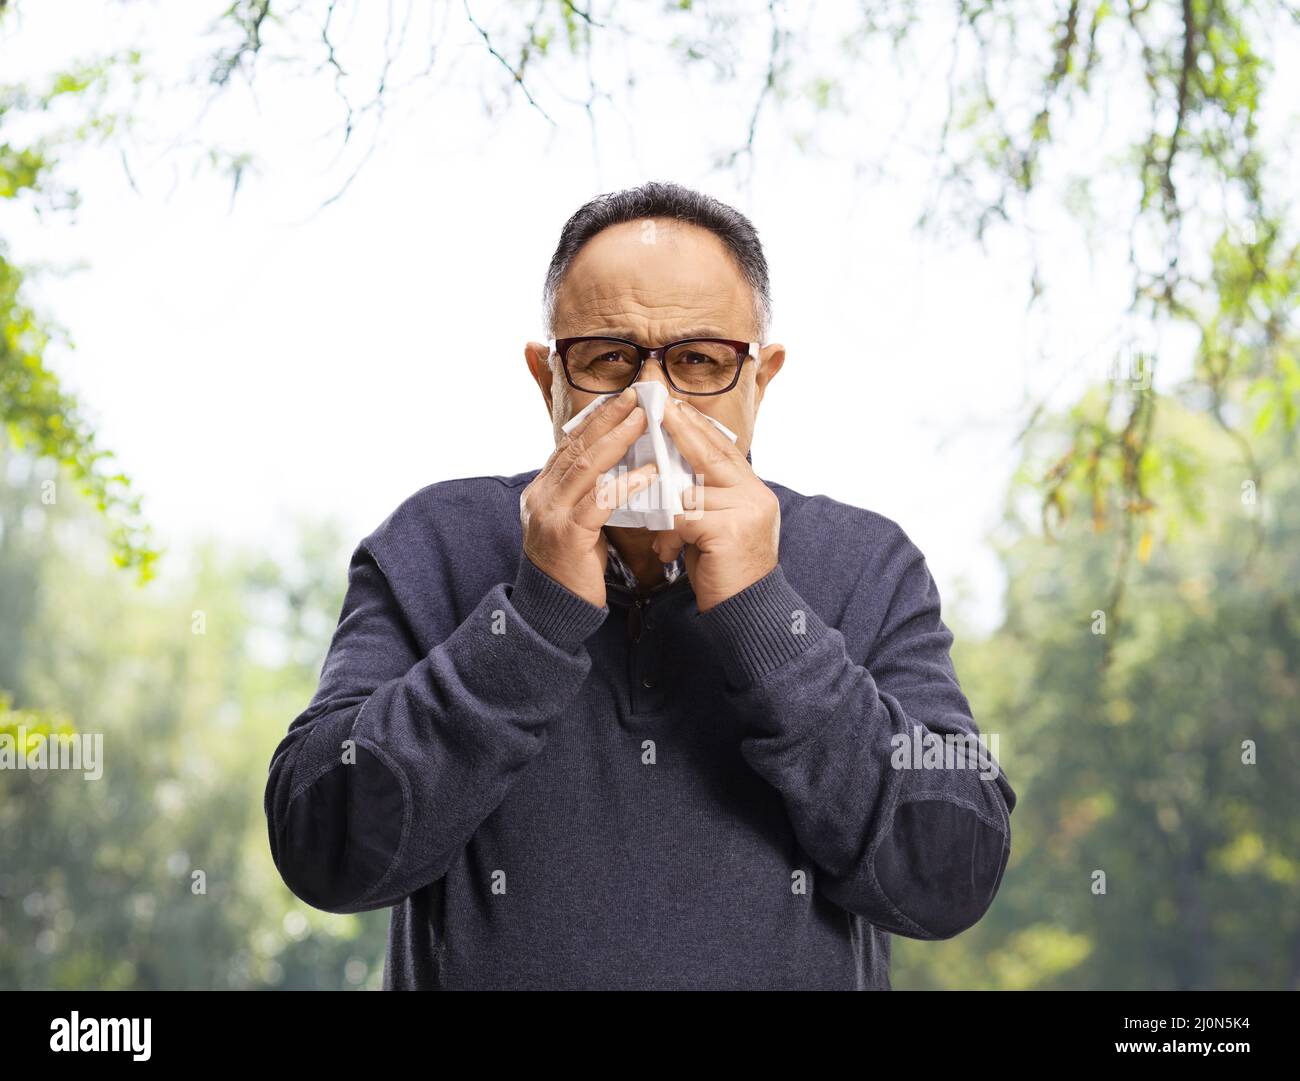 Mature man blowing nose with a paper tissue in a park with trees behind Stock Photo